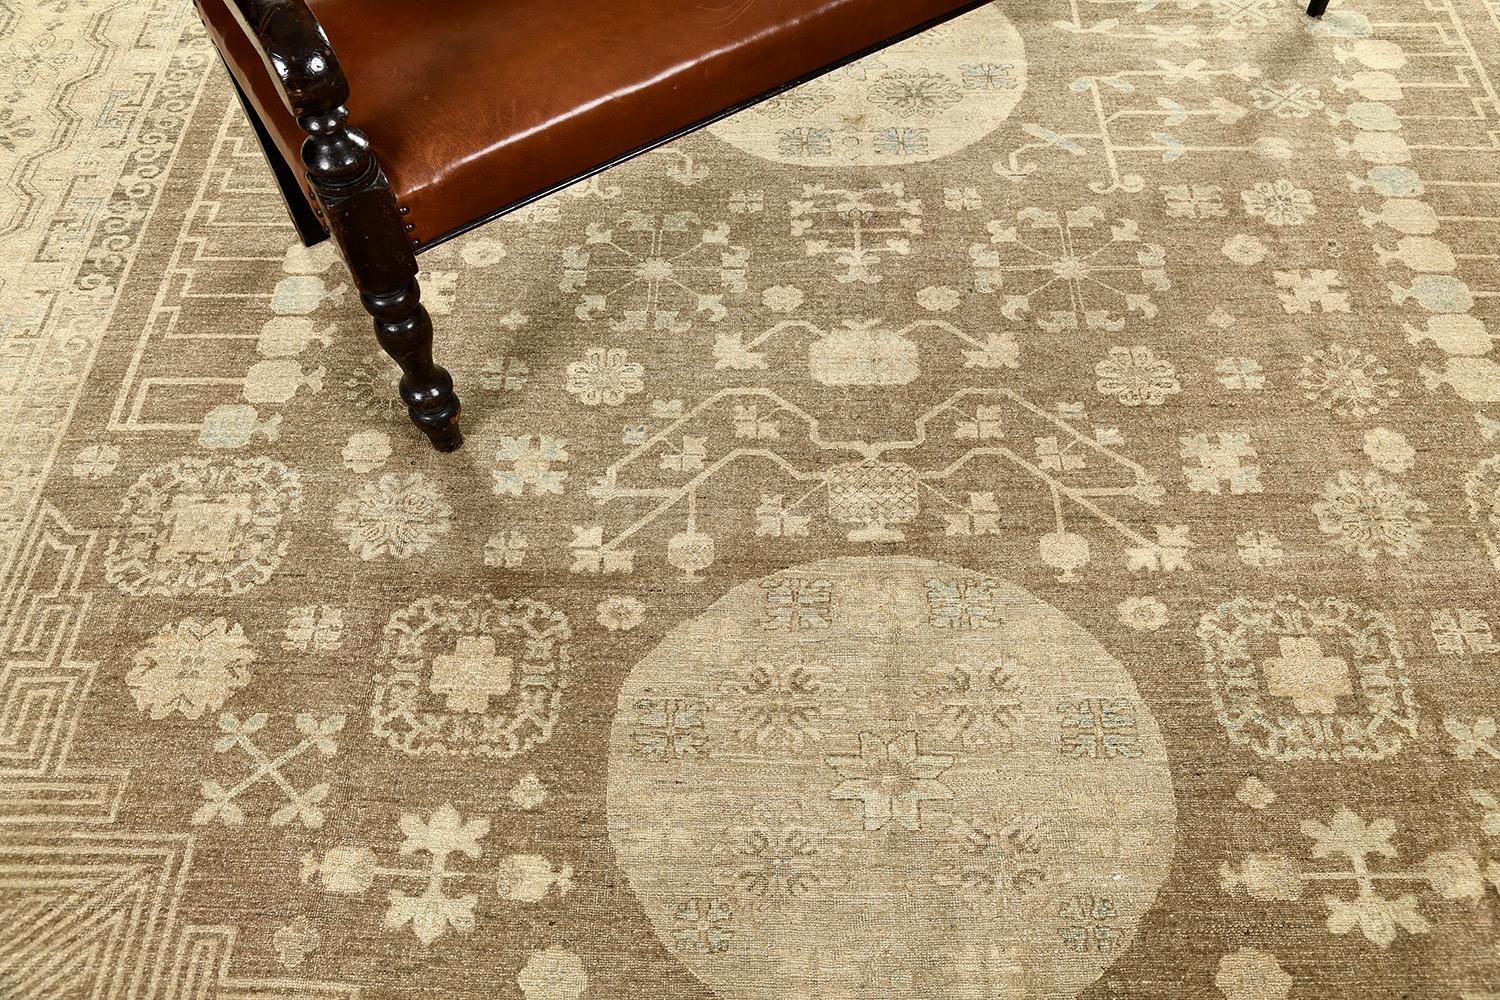 A breathtaking Khotan revival piece that highlights a field of botanical elements comprised of pomegranate and stylized florals. This magnificent rug exudes cozy and dainty elegance featuring the fascinating muted tones of camel, taupe and dusty